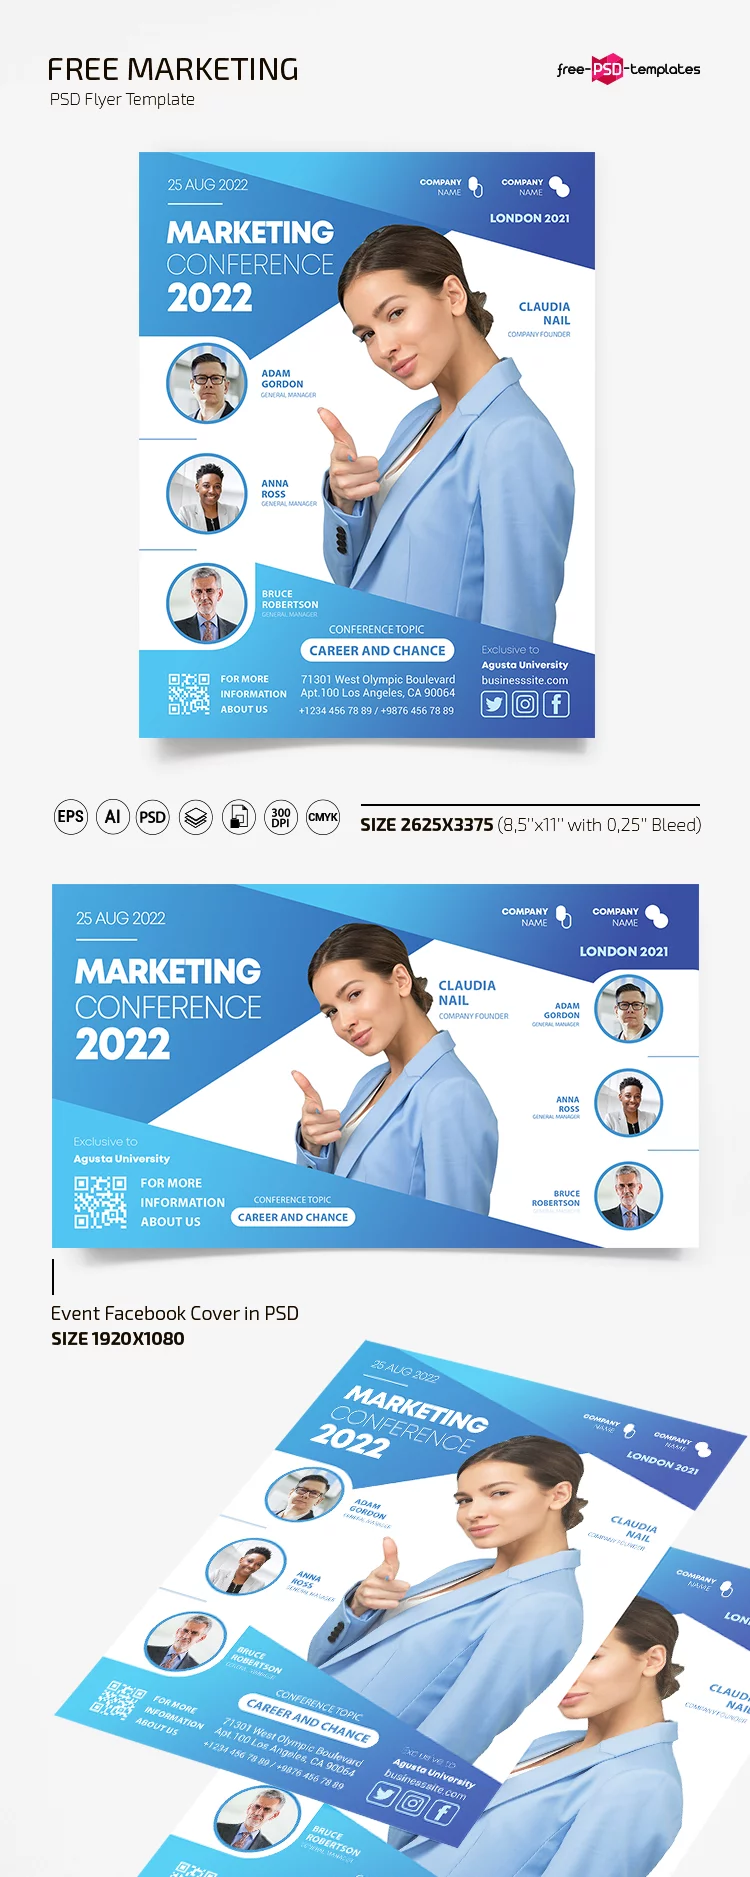 Free Marketing Flyer Template in PSD + AI